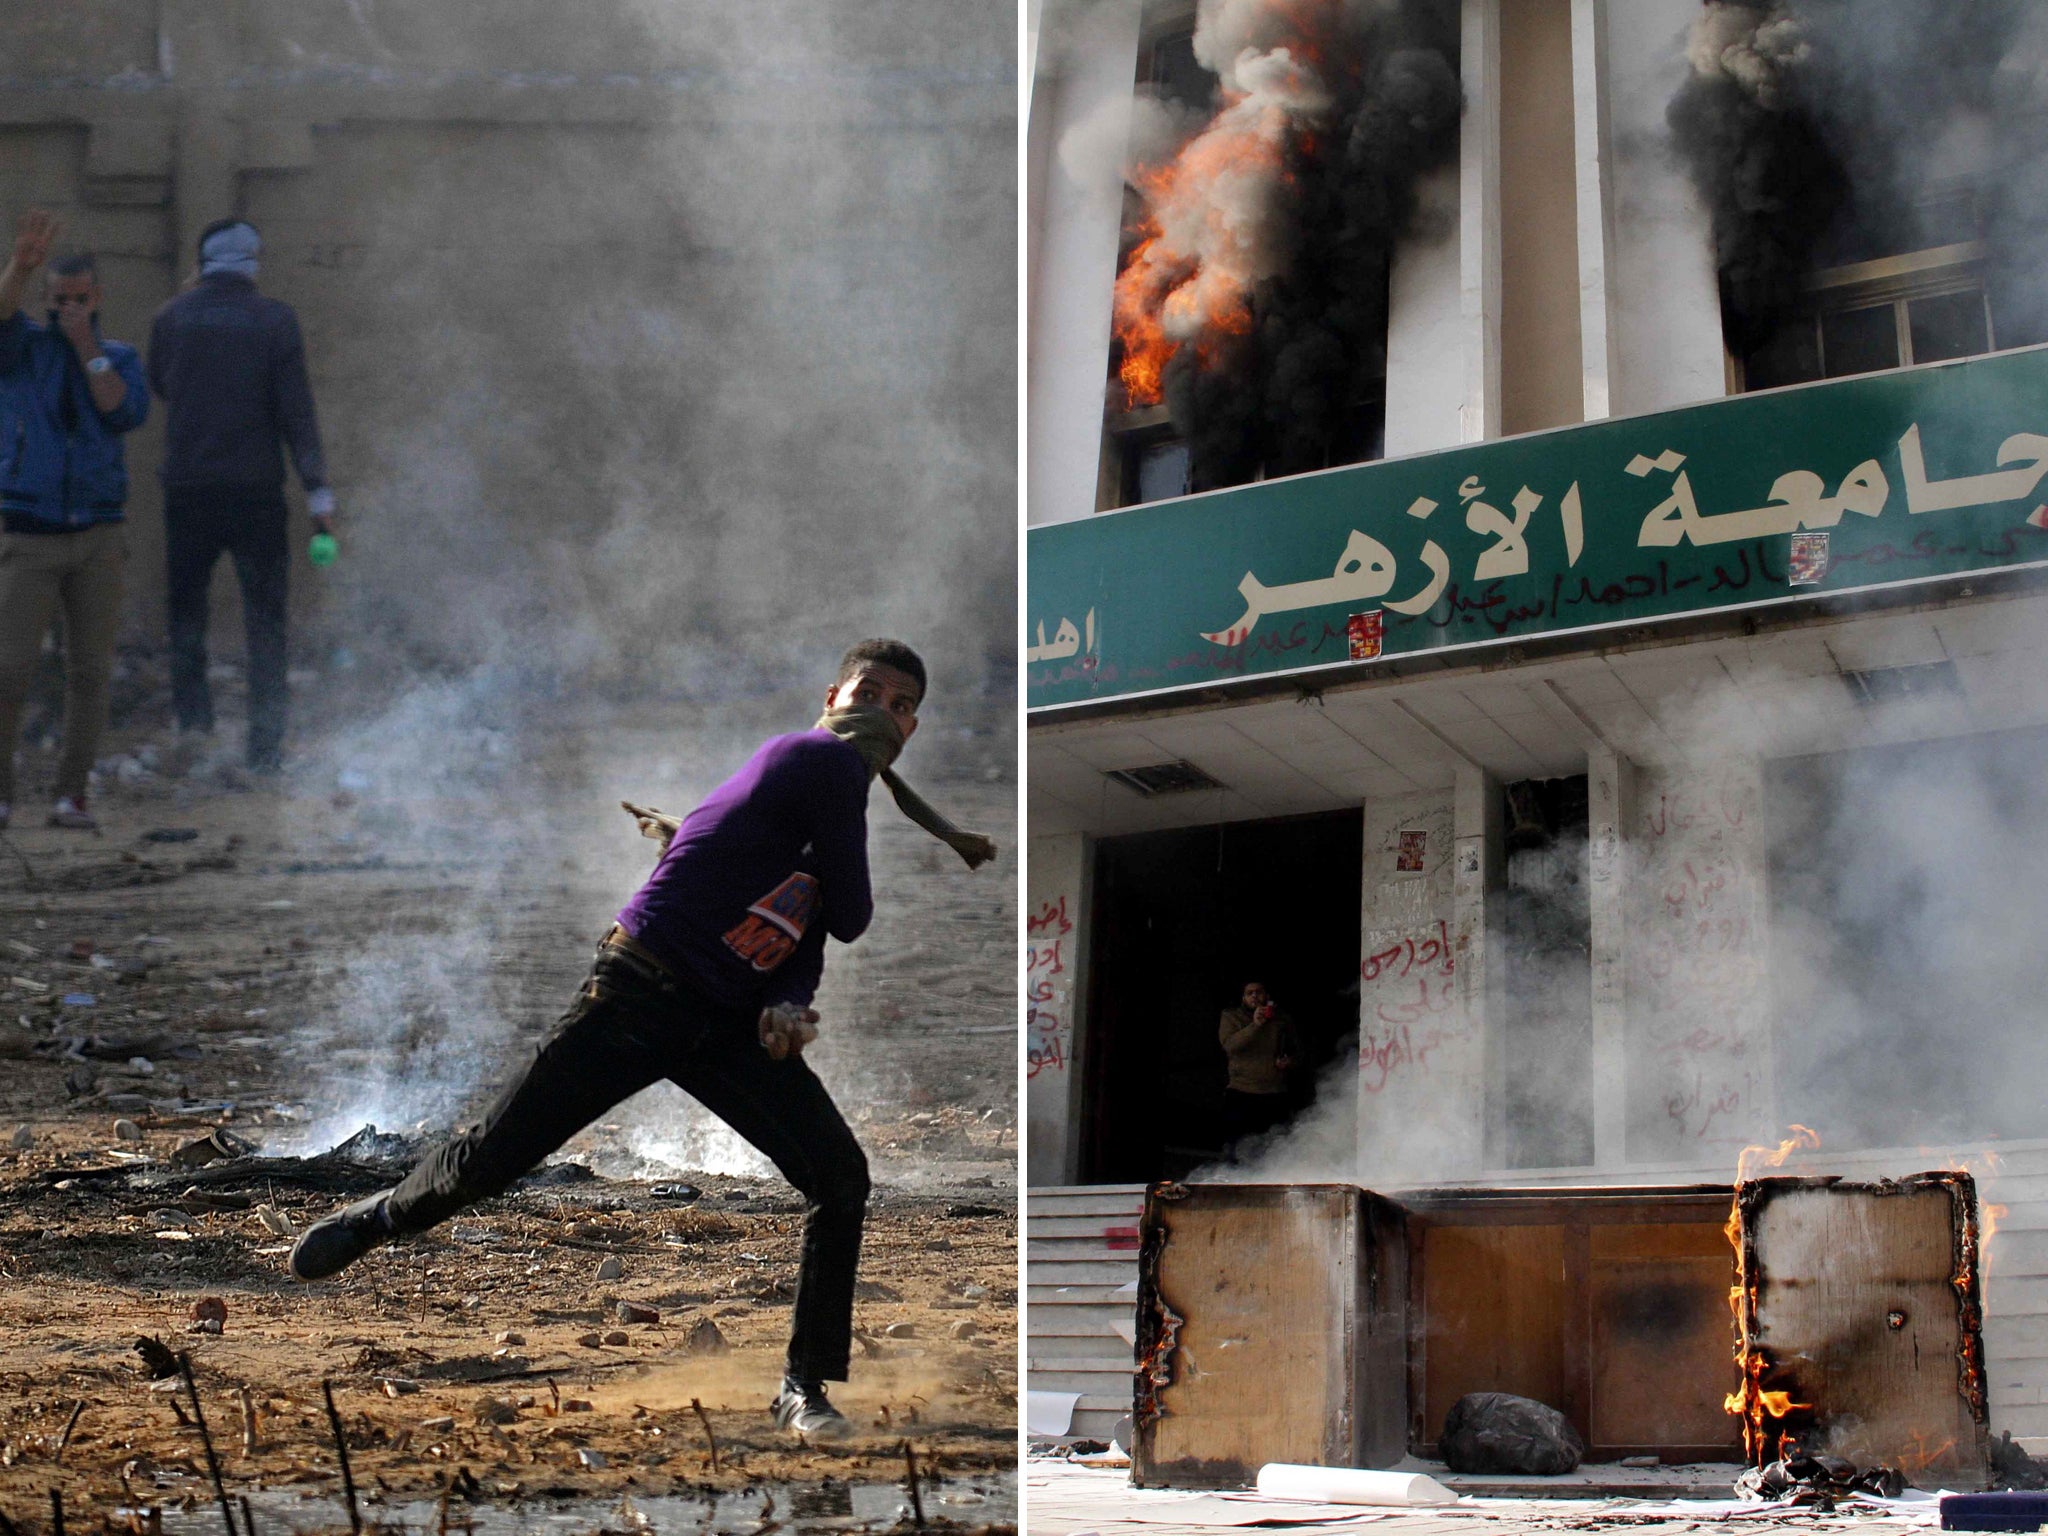 Student supporters of the Muslim Brotherhood clash with Egyptian security forces as university buildings are set ablaze